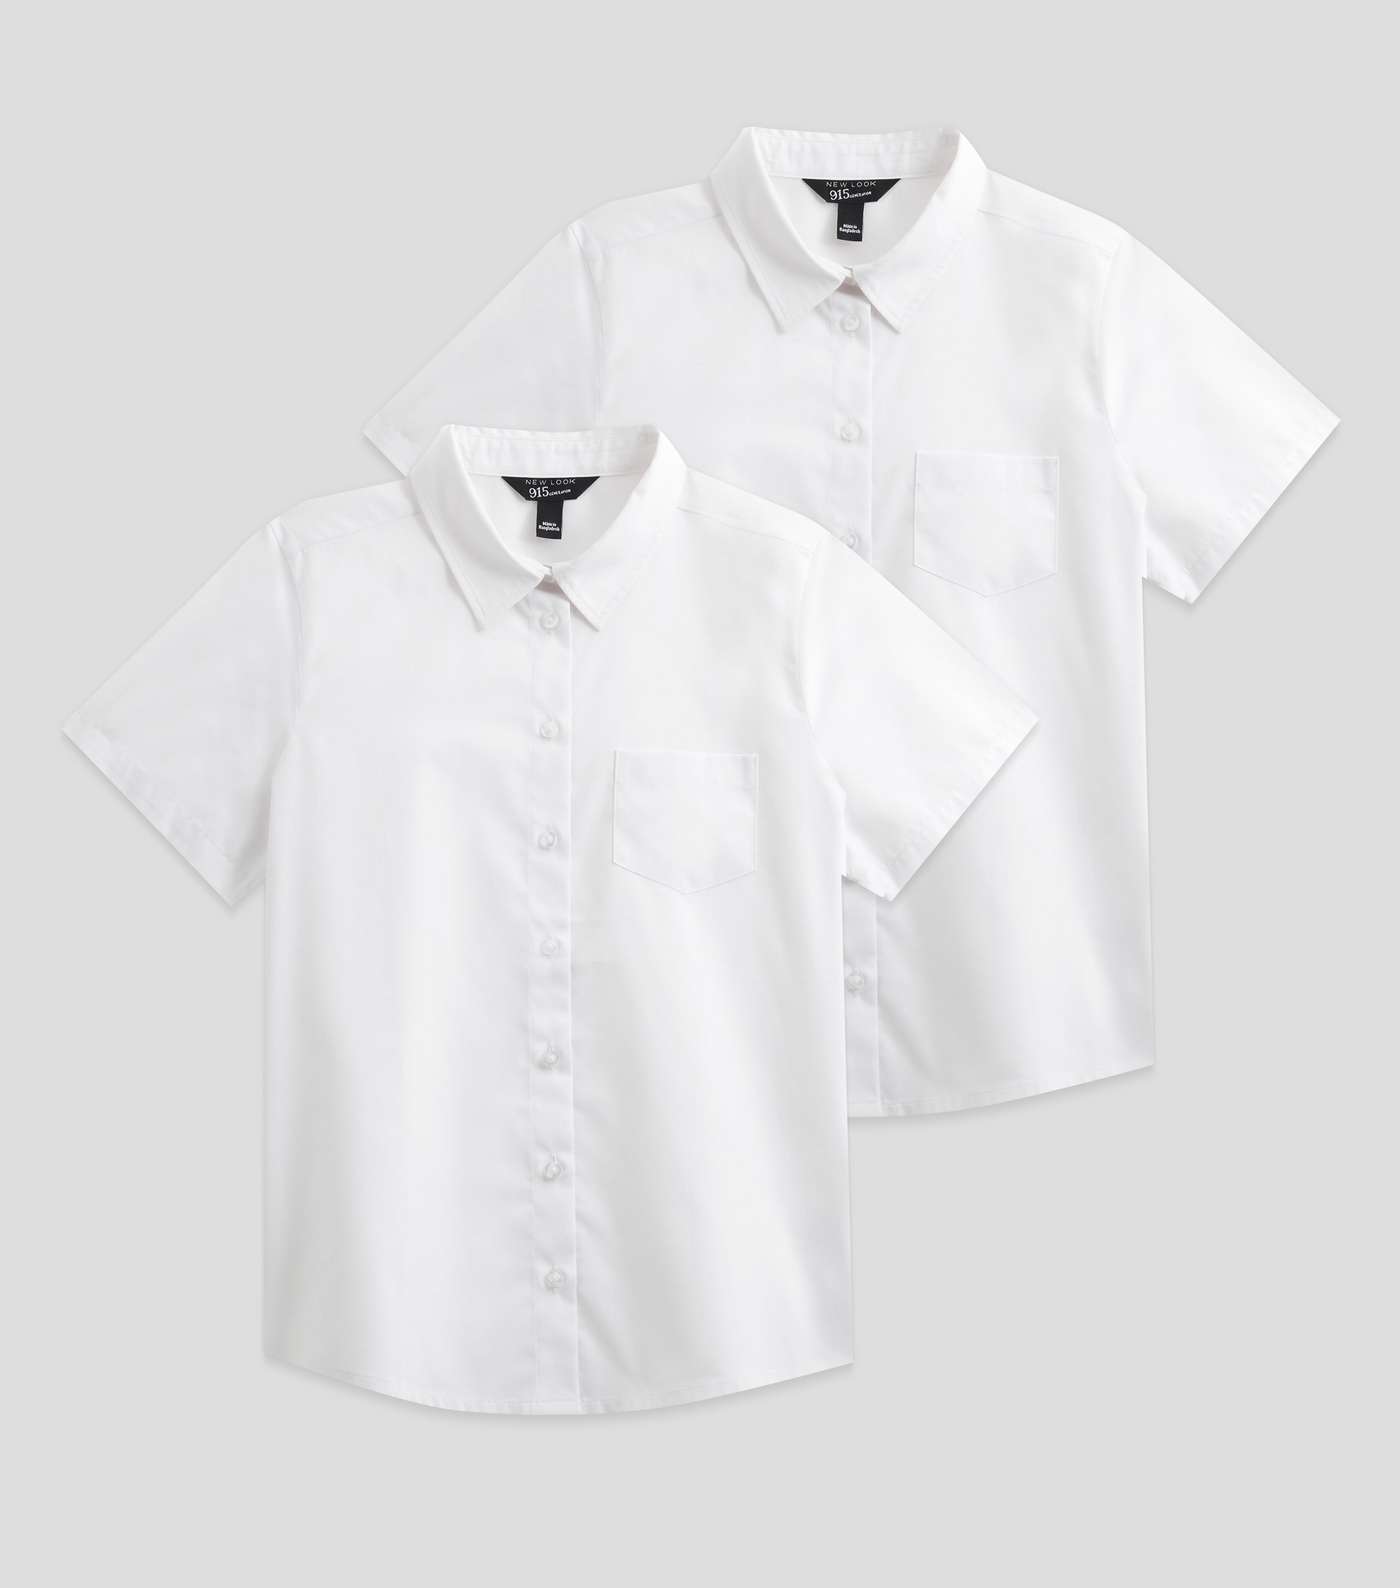 Girls 2 Pack White Slim Fit Easy Care School Shirts Image 5